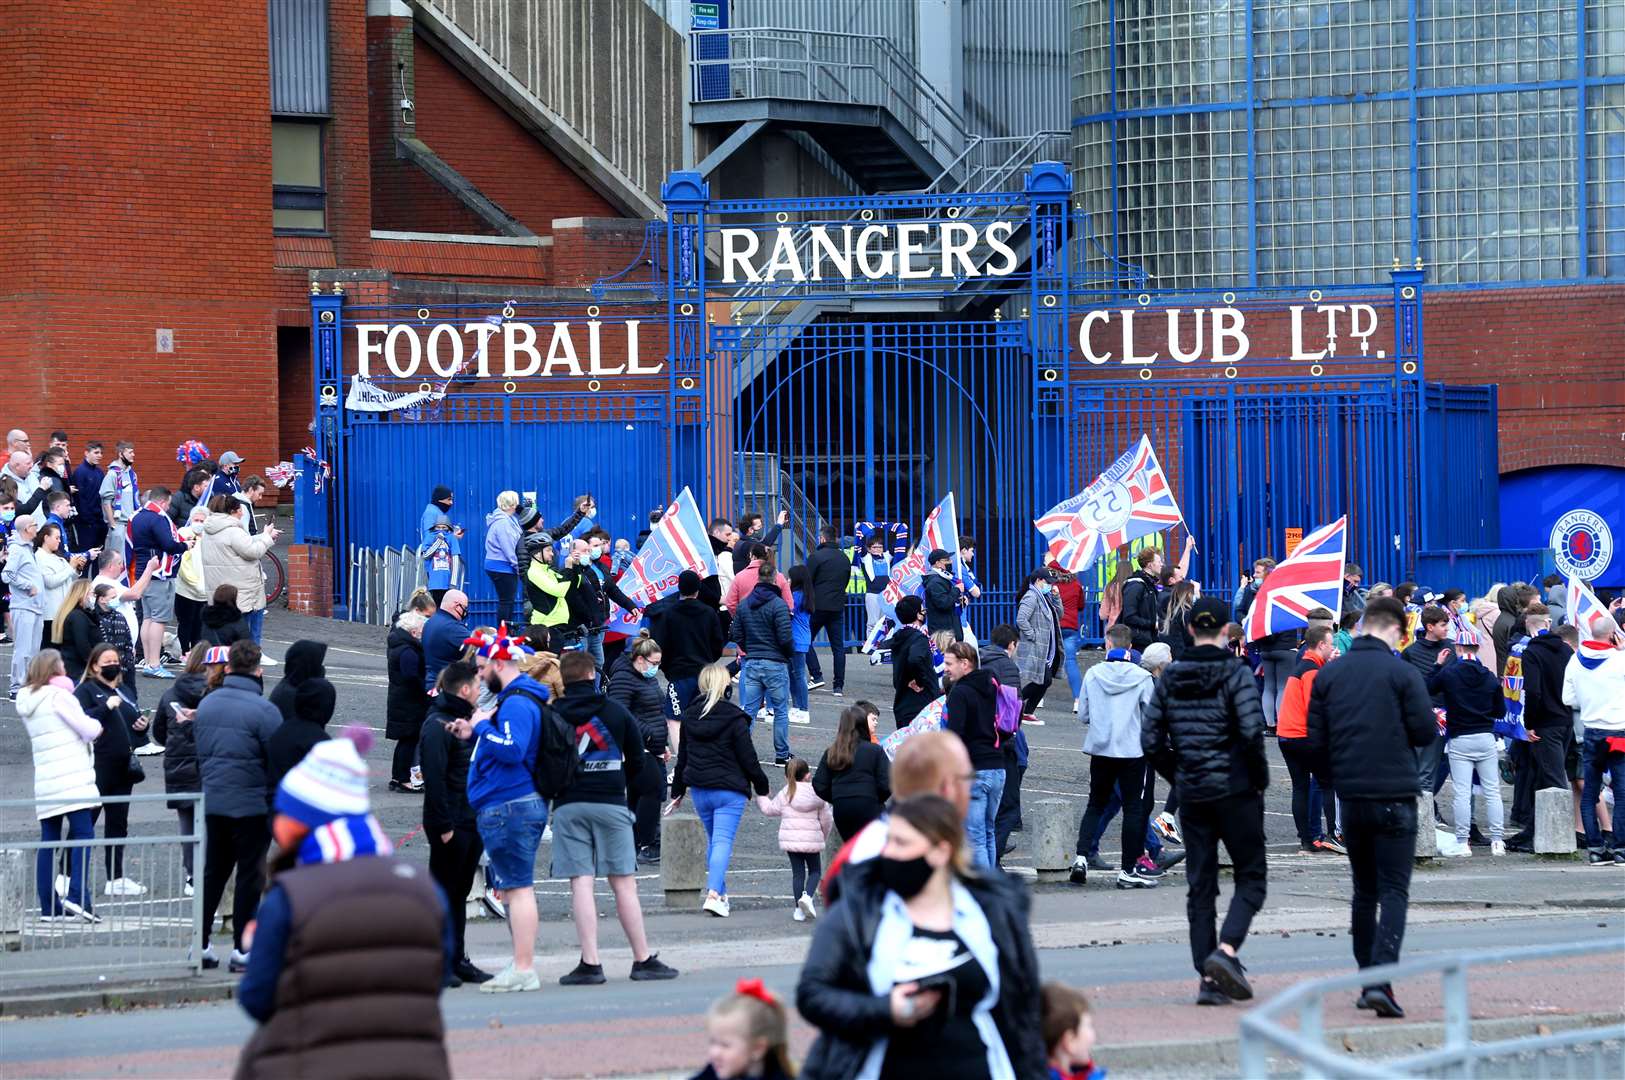 Rangers fans have been urged not to gather together (Robert Perry/PA)